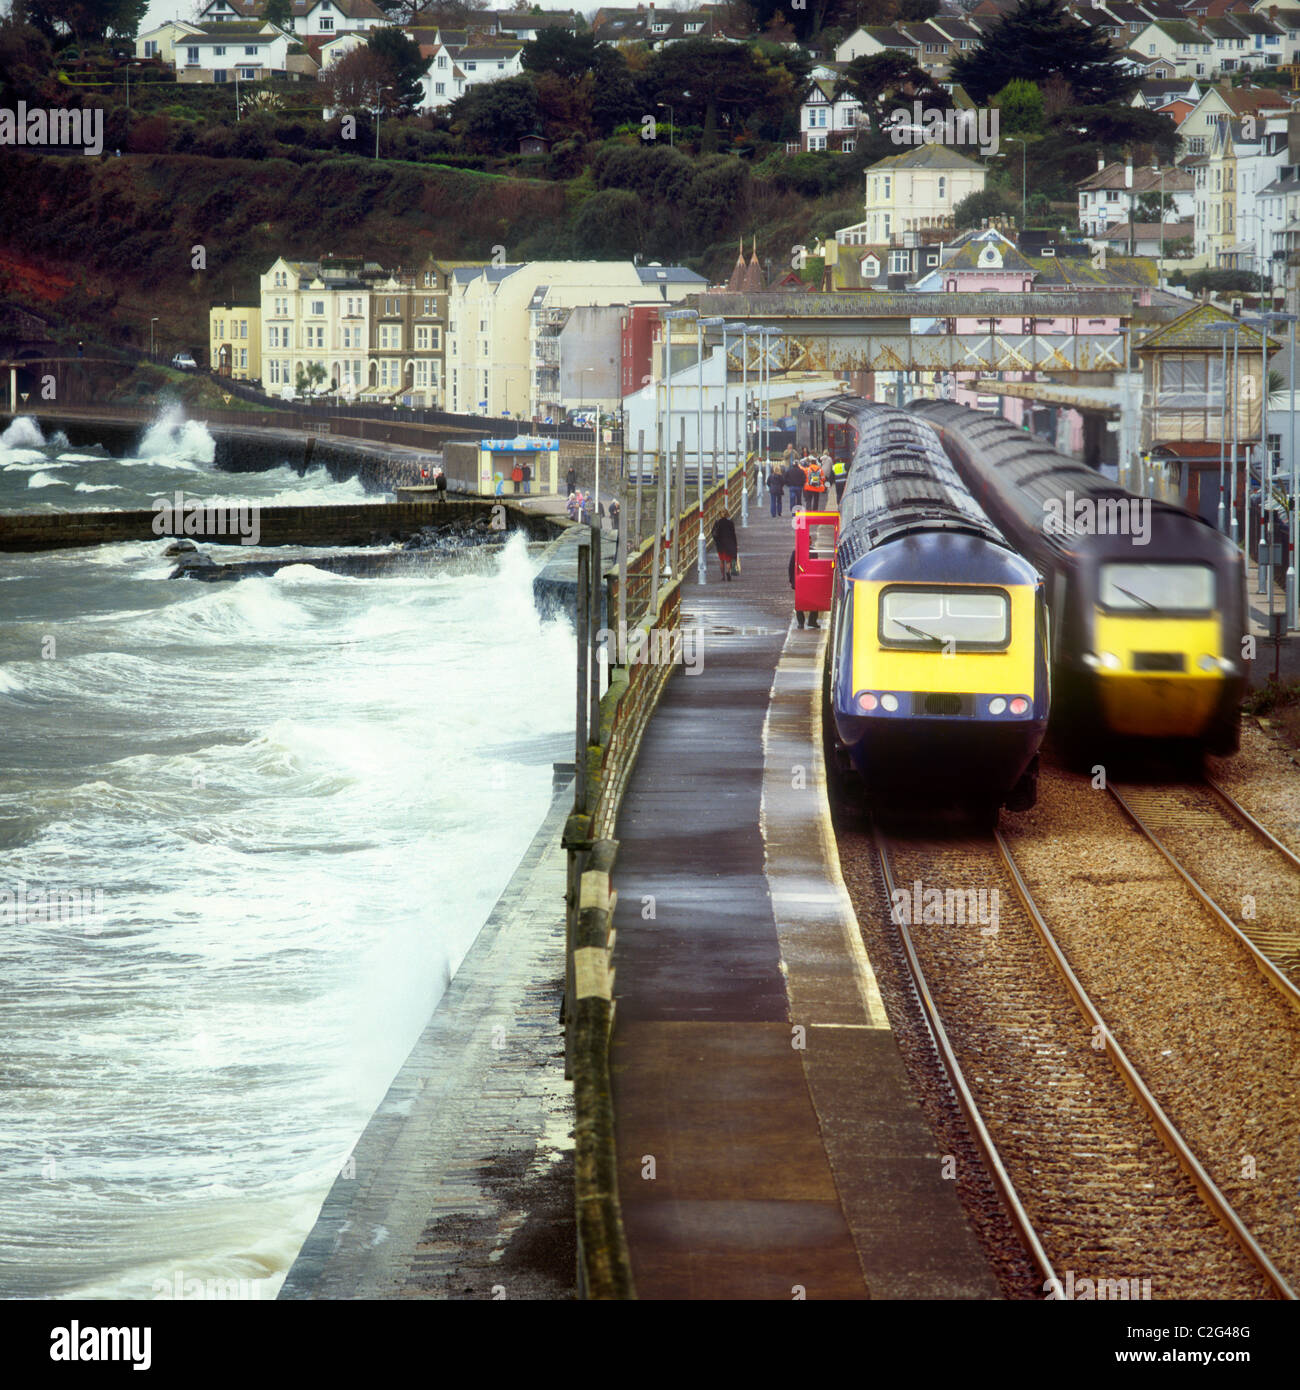 Plymouth-bound First Great Western high speed train calls at Dawlish station while Cross Country HST passes through at speed. Stock Photo